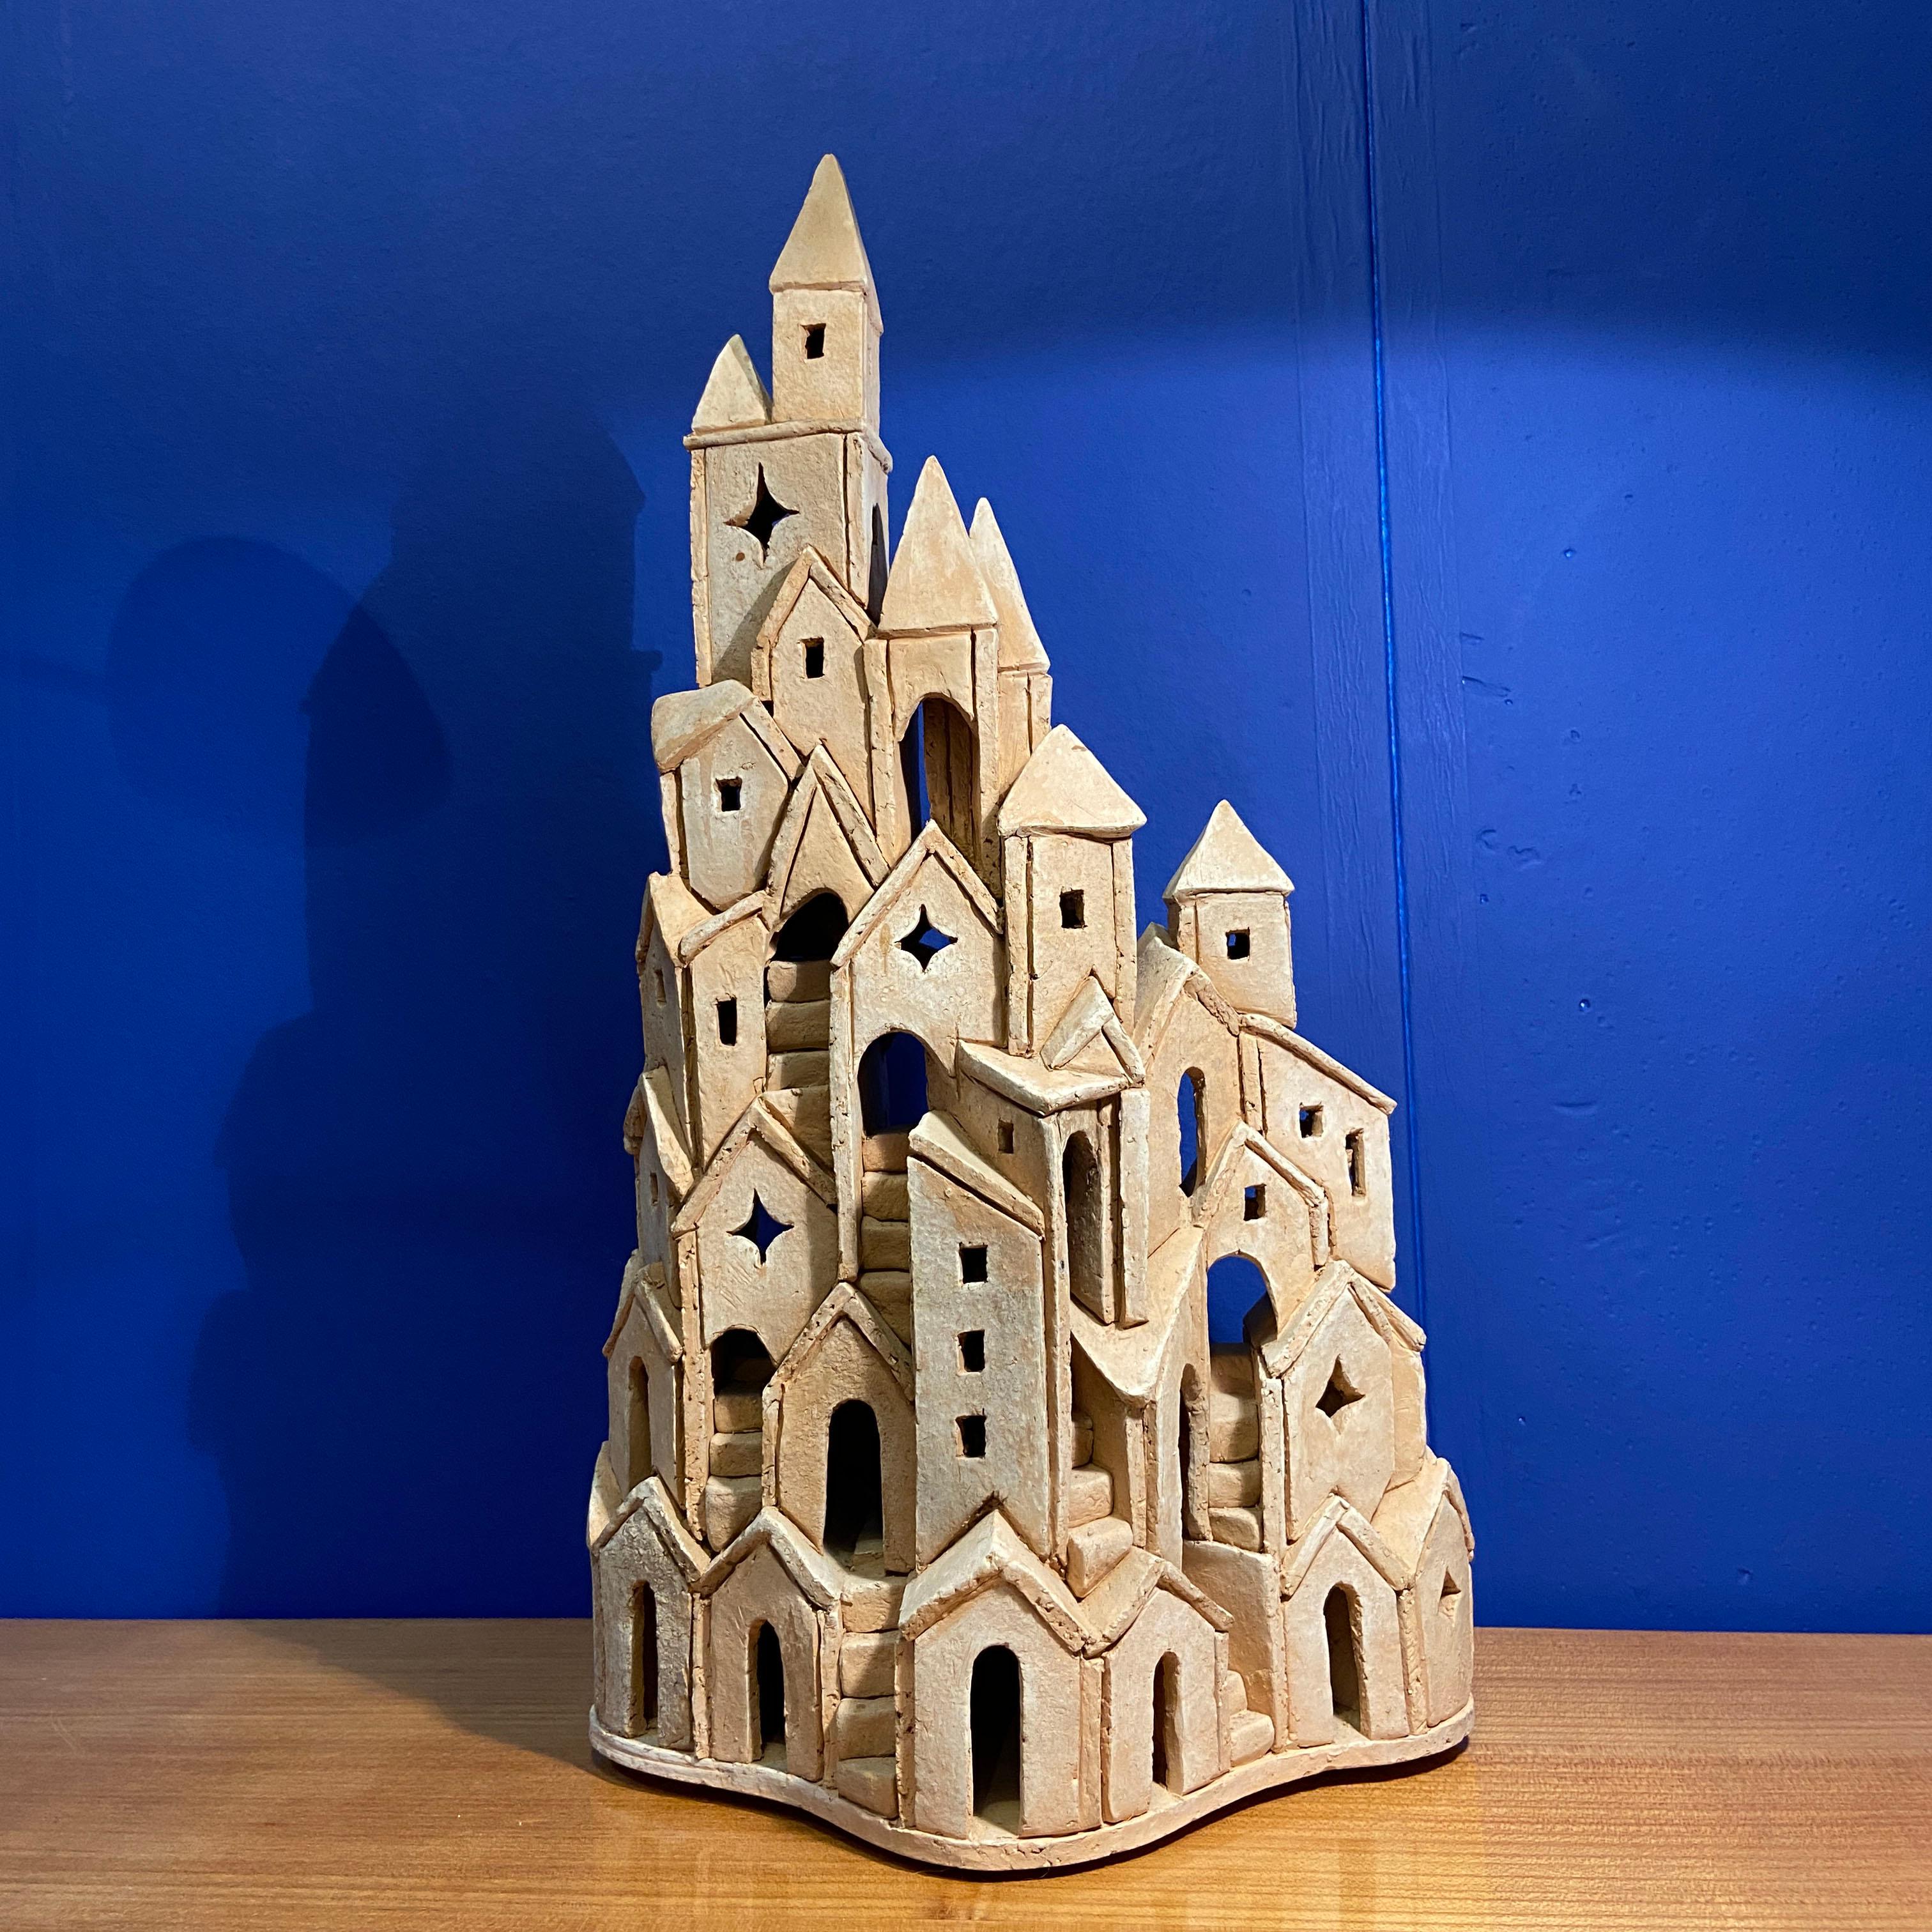 Surrealist imaginary architectural tower build in red baking clay by Dutch artist Arie Bouter, Gouda 1995 (B. 1942) is carefully hand sculpted. The sculpture is based on medieval European architecture and has a strong resemblance with Mont St.